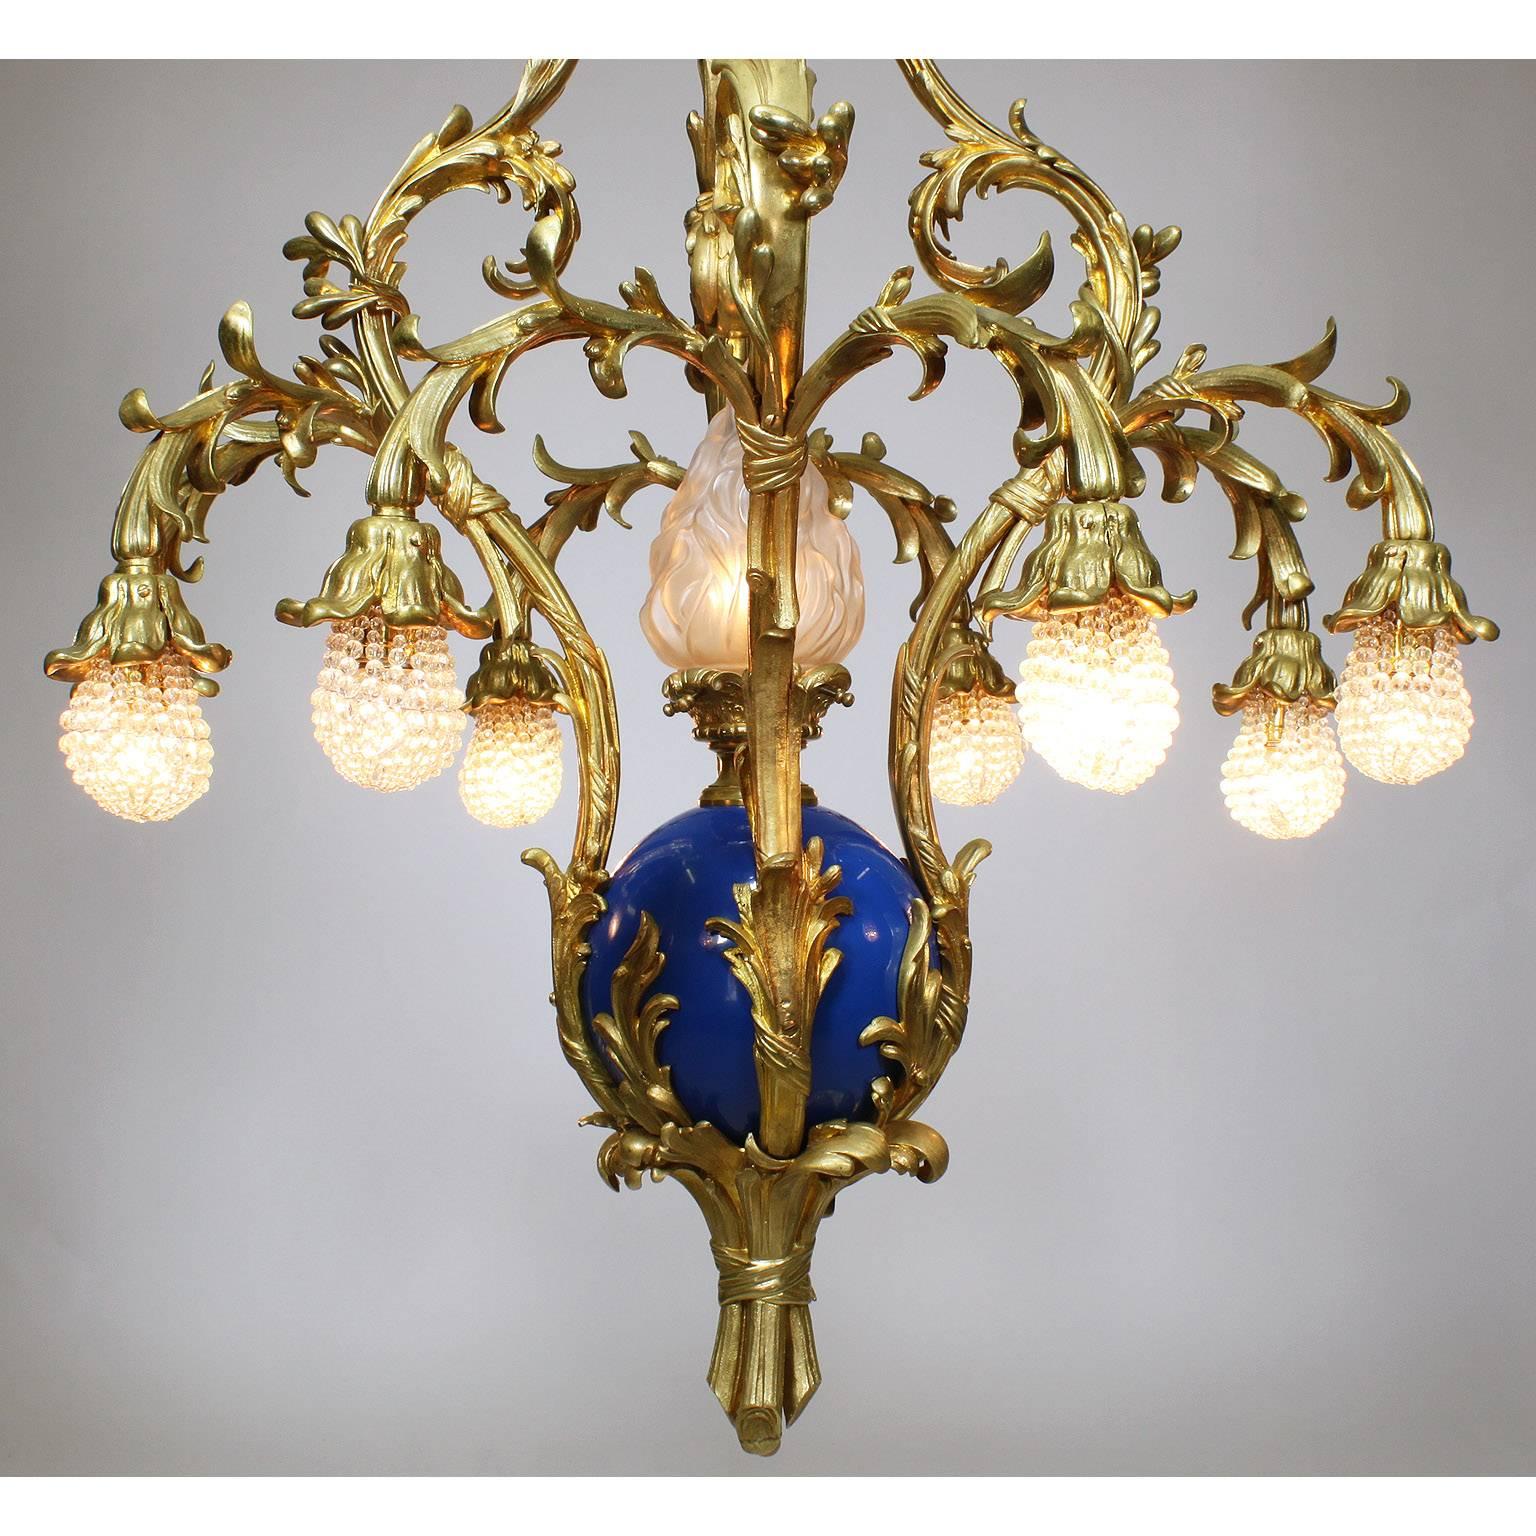 Early 20th Century French Belle Époque 19th-20th Century Gilt & Enameled Bronze Bouquet Chandelier For Sale